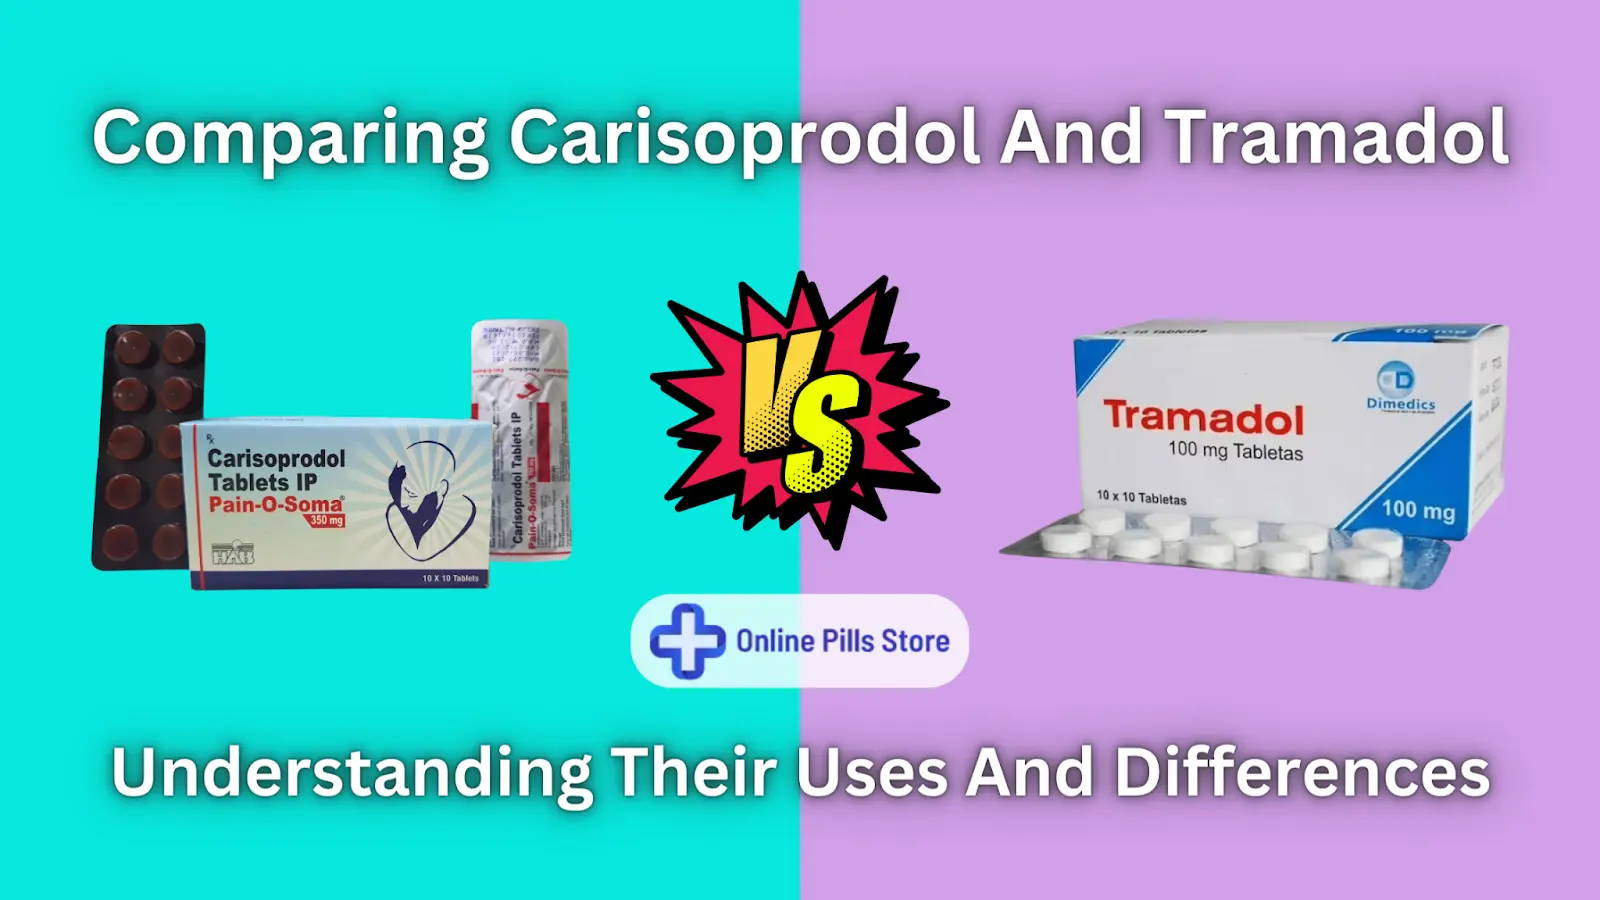 Comparing Carisoprodol And Tramadol- Understanding Their Uses And Differences